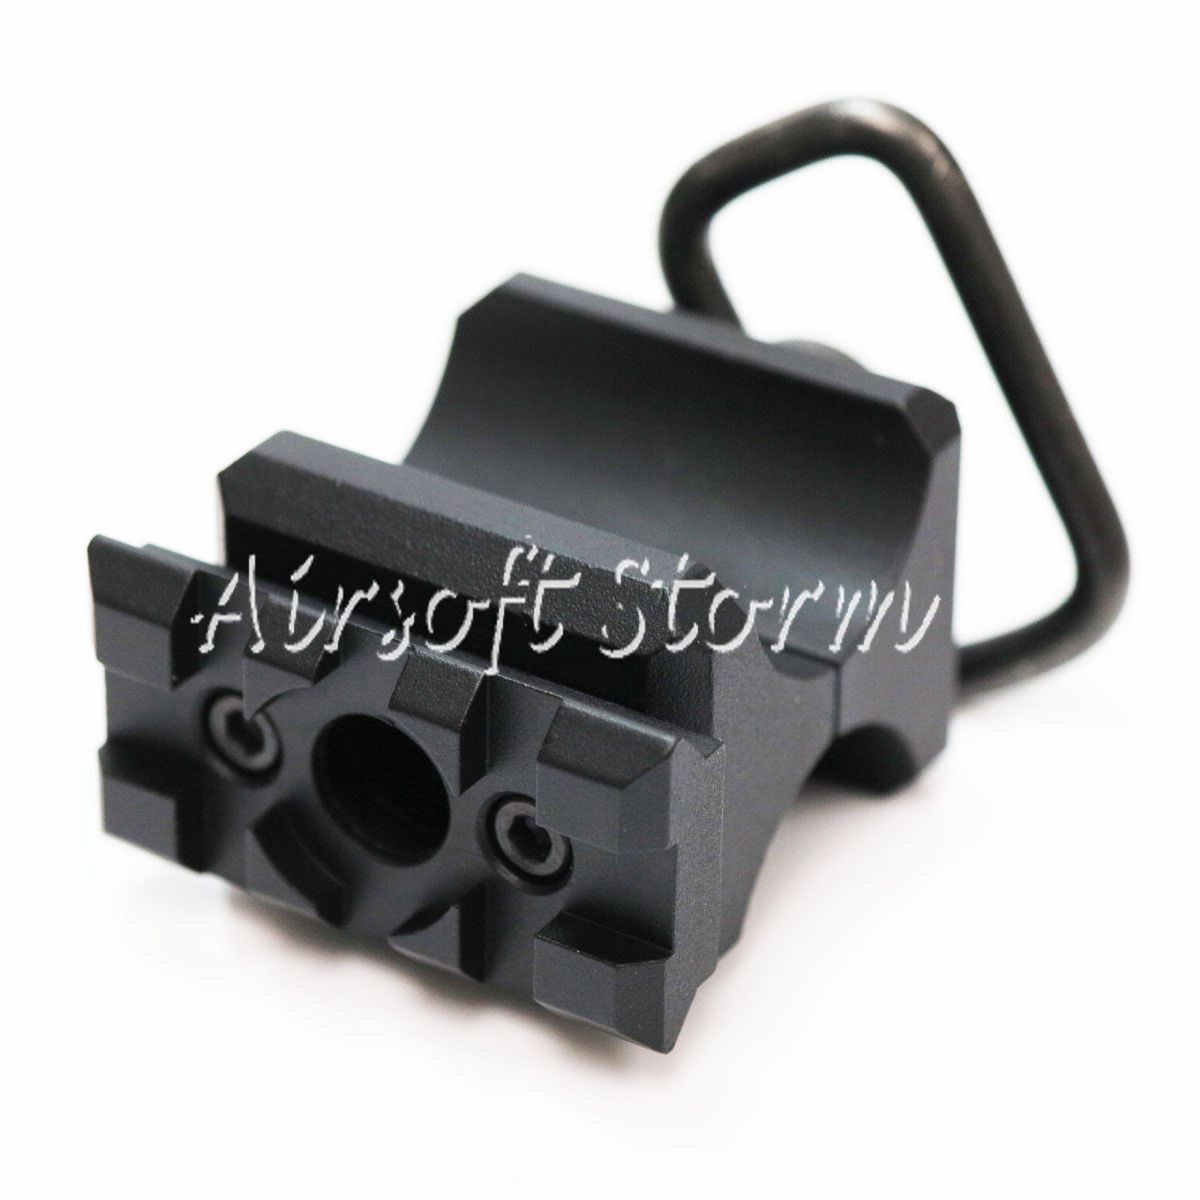 Airsoft SWAT Tactical Gear APS Tactical Picatinny Rail with Sling Swivel for CAM870 Shotgun AEG